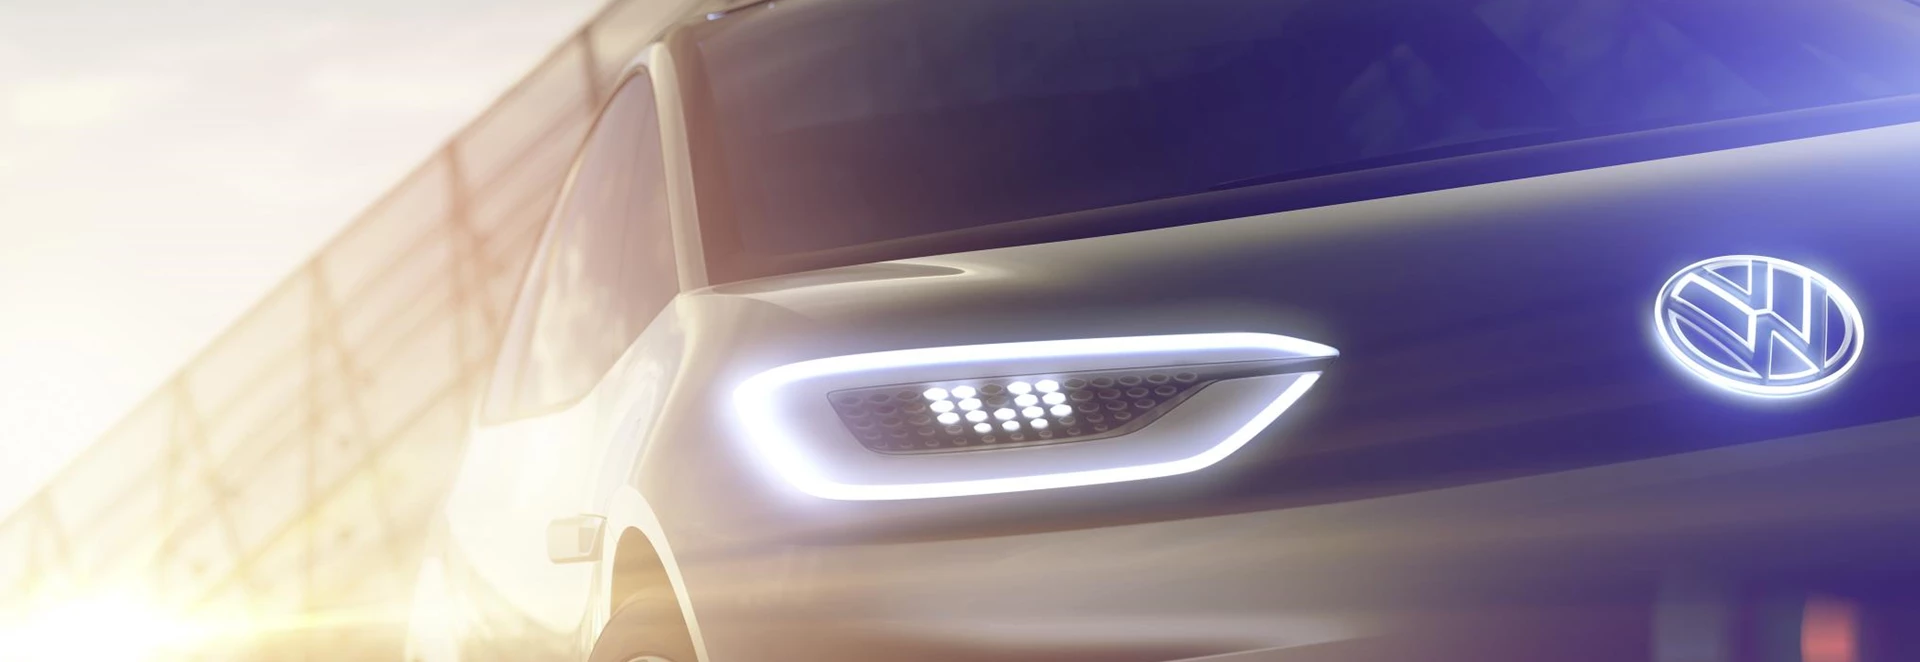 Volkswagen teases ‘history defining’ electric car concept ahead of Paris Motor Show